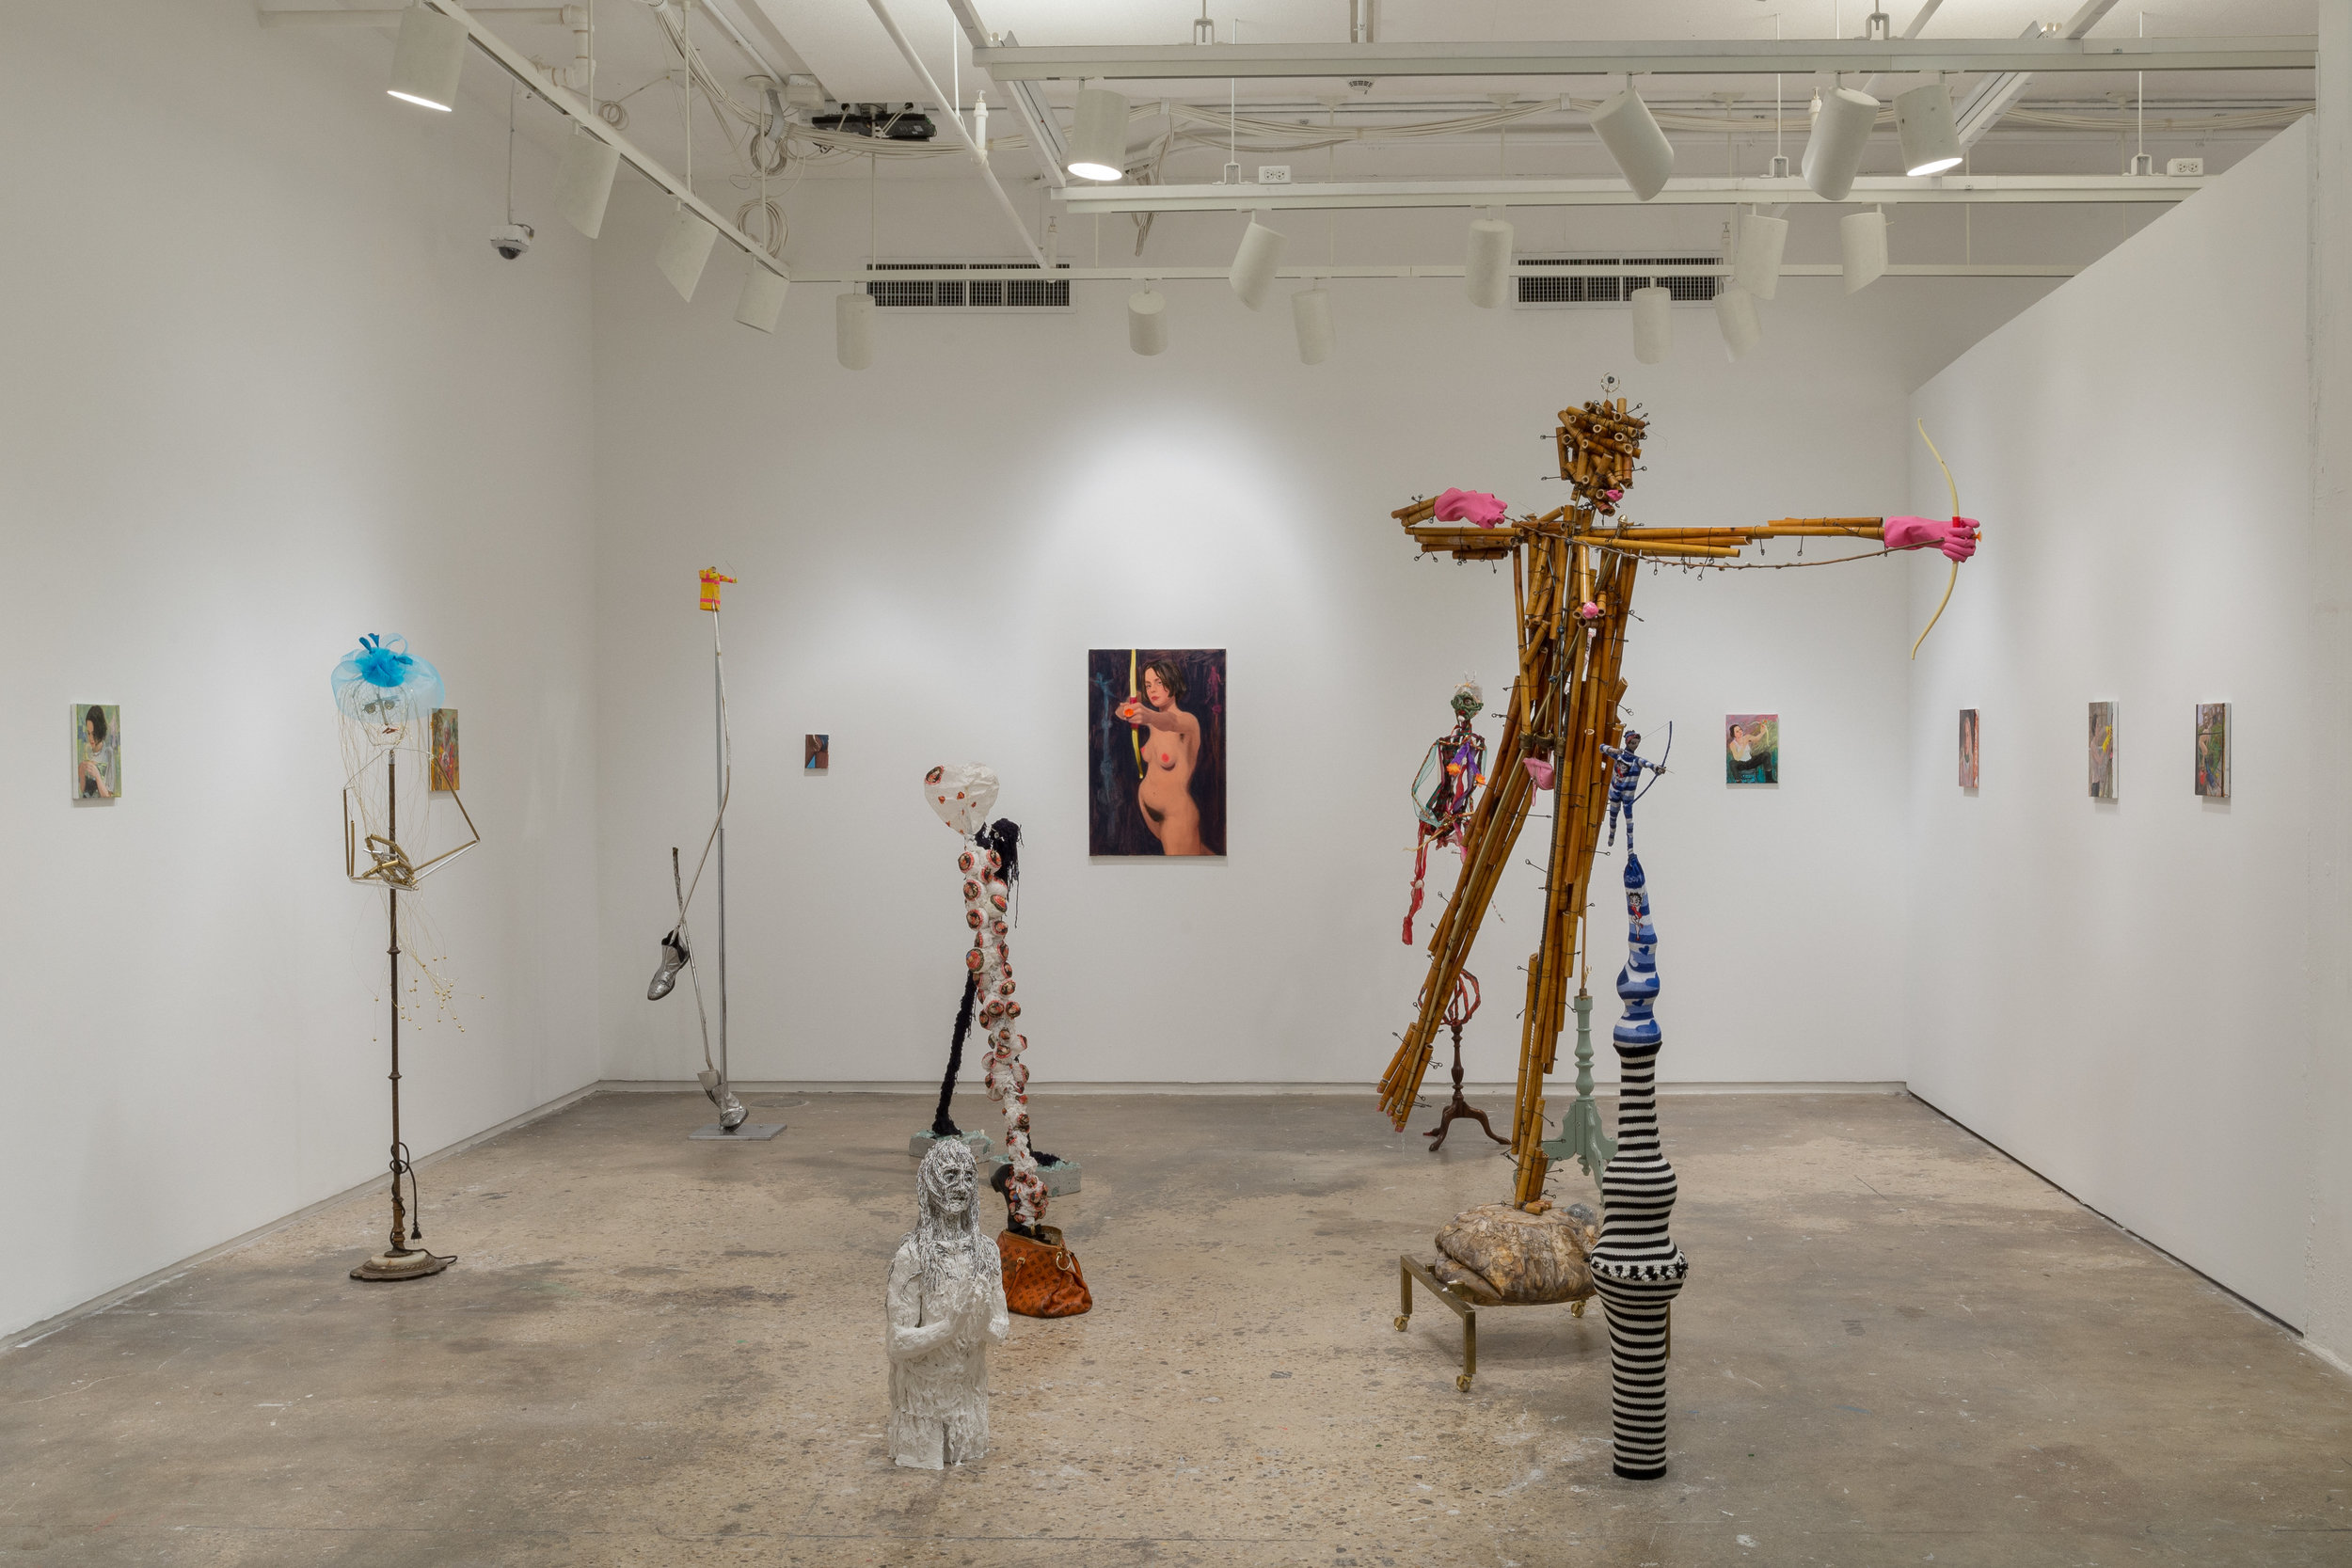  Installation view, Hunter College MFA thesis show, 205 Hudson Street, New York, New York.   All sculptures by Elizabeth Englander, all paintings by Jenna Gribbon.   May 9 to June 1, 2019. 